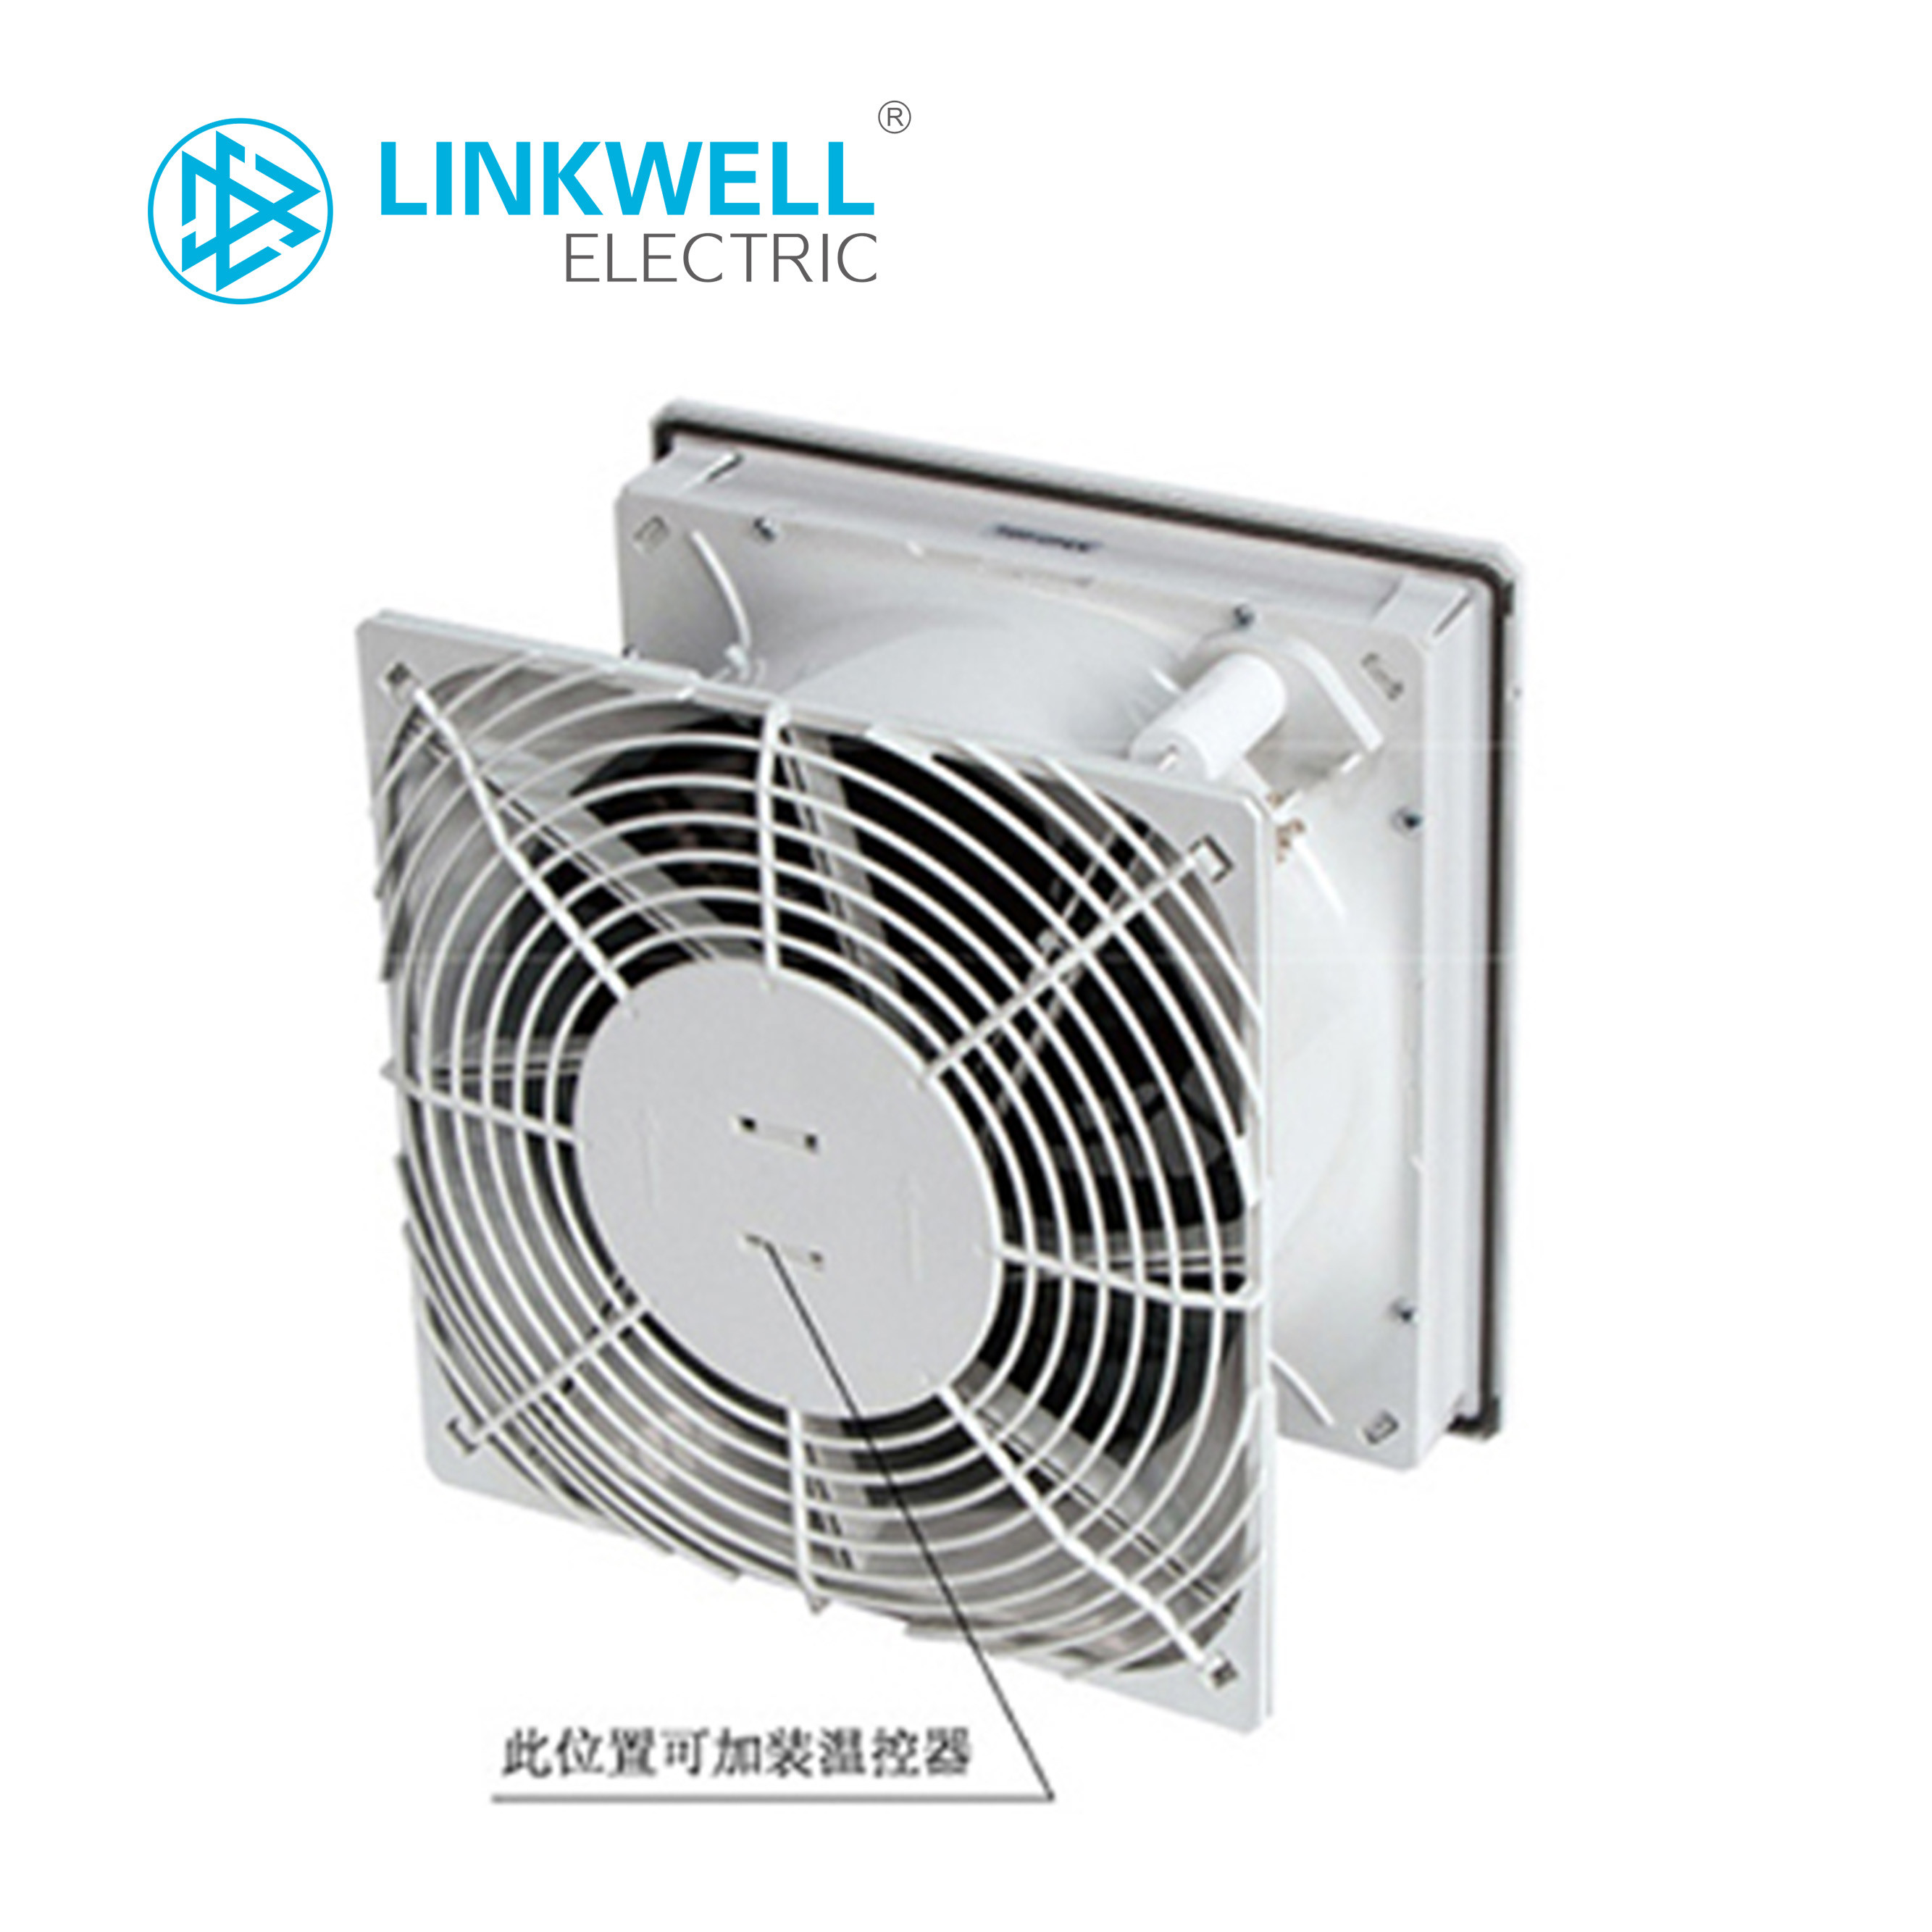 FF320-Electric box fan and filter